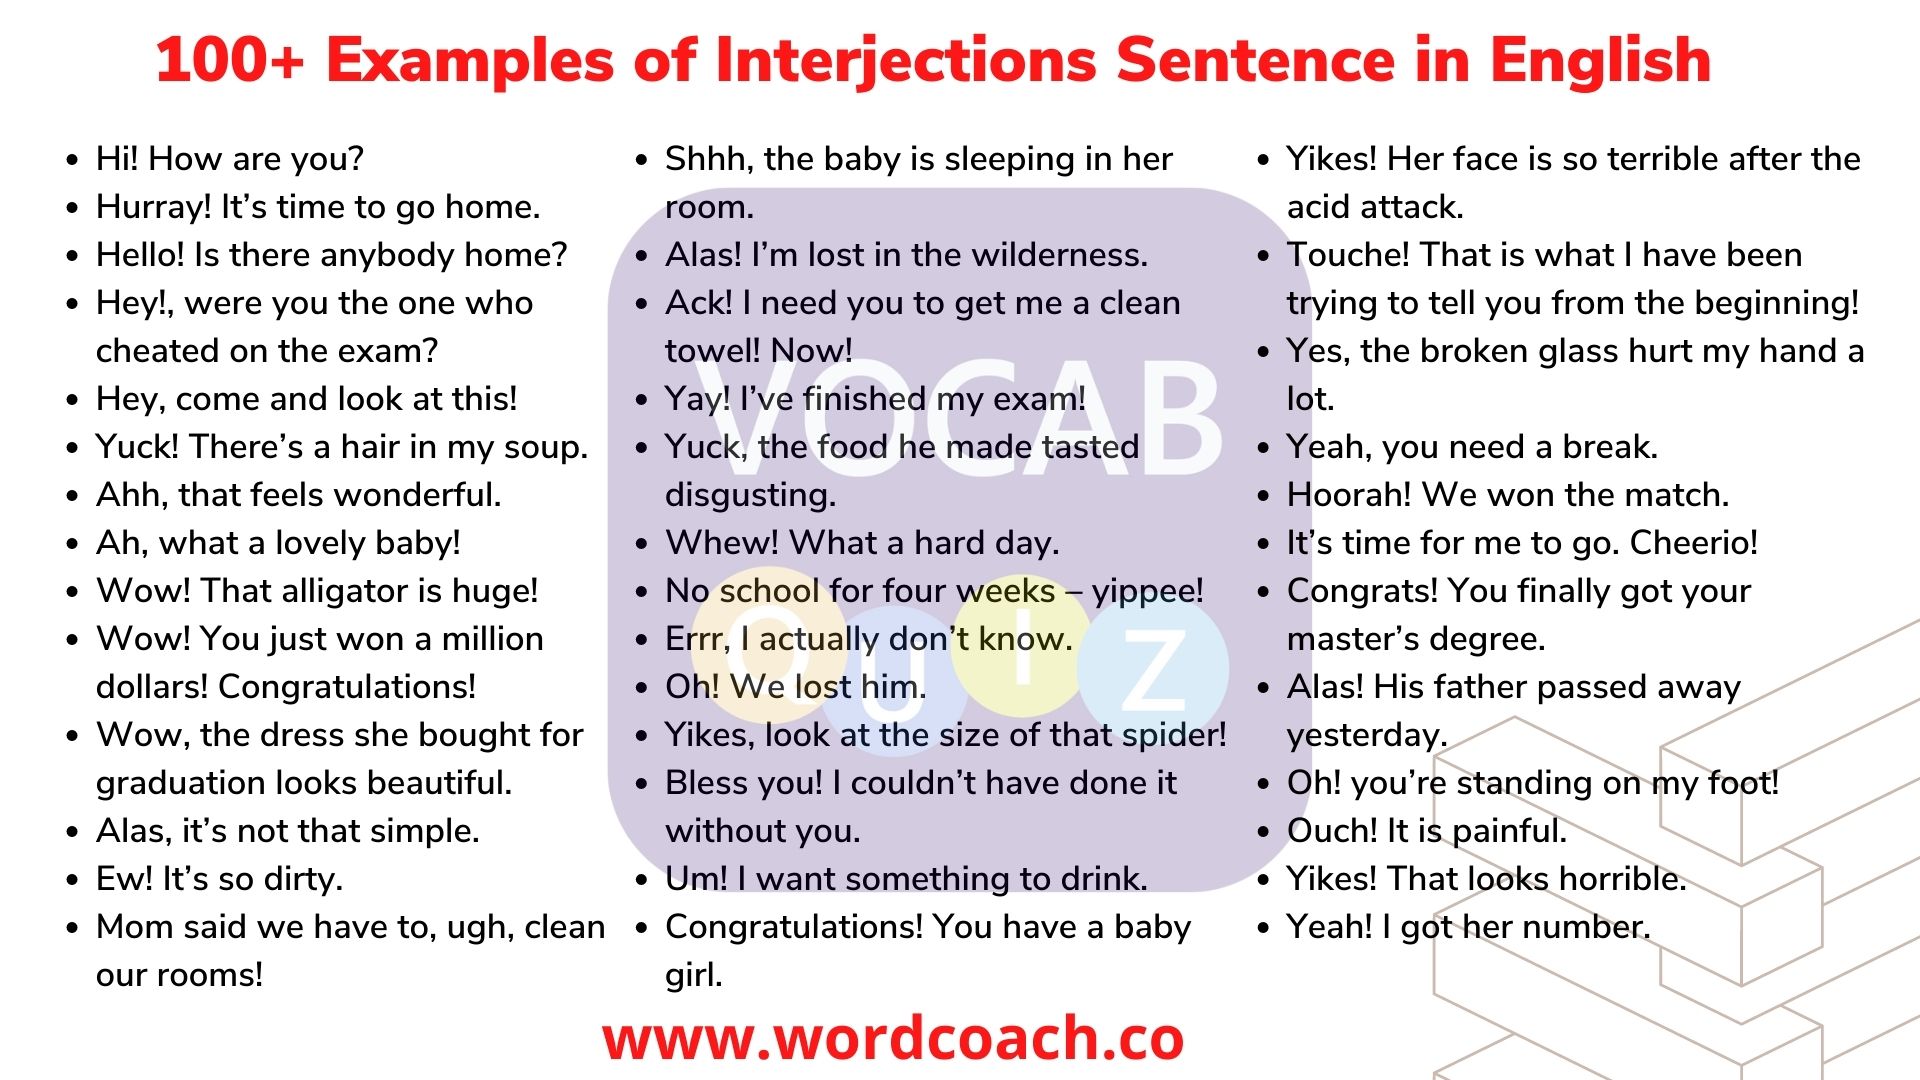 100+ Examples of Interjections Sentence in English - wordcoach.co